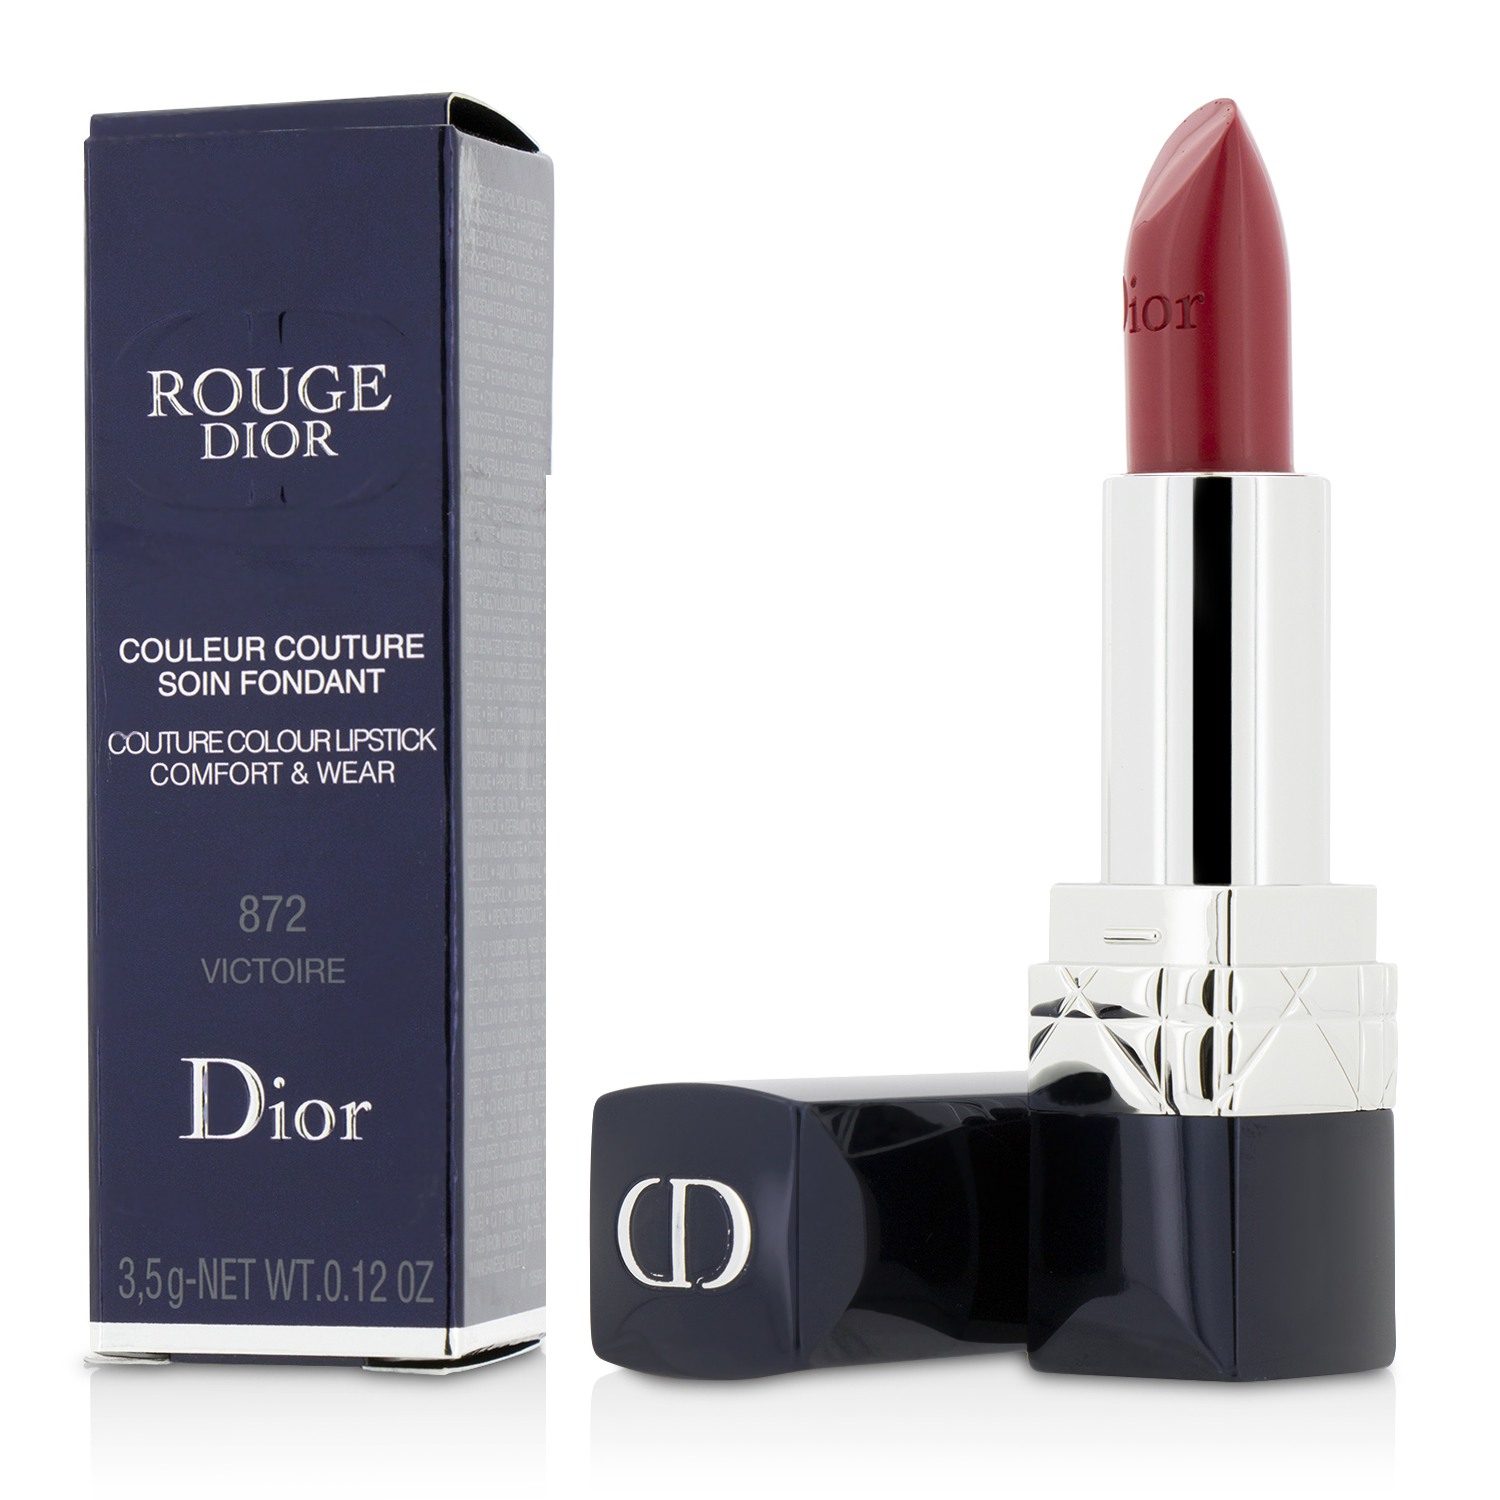 Rouge Dior Couture Colour Comfort & Wear Lipstick - # 872 Victoire Christian Dior Image